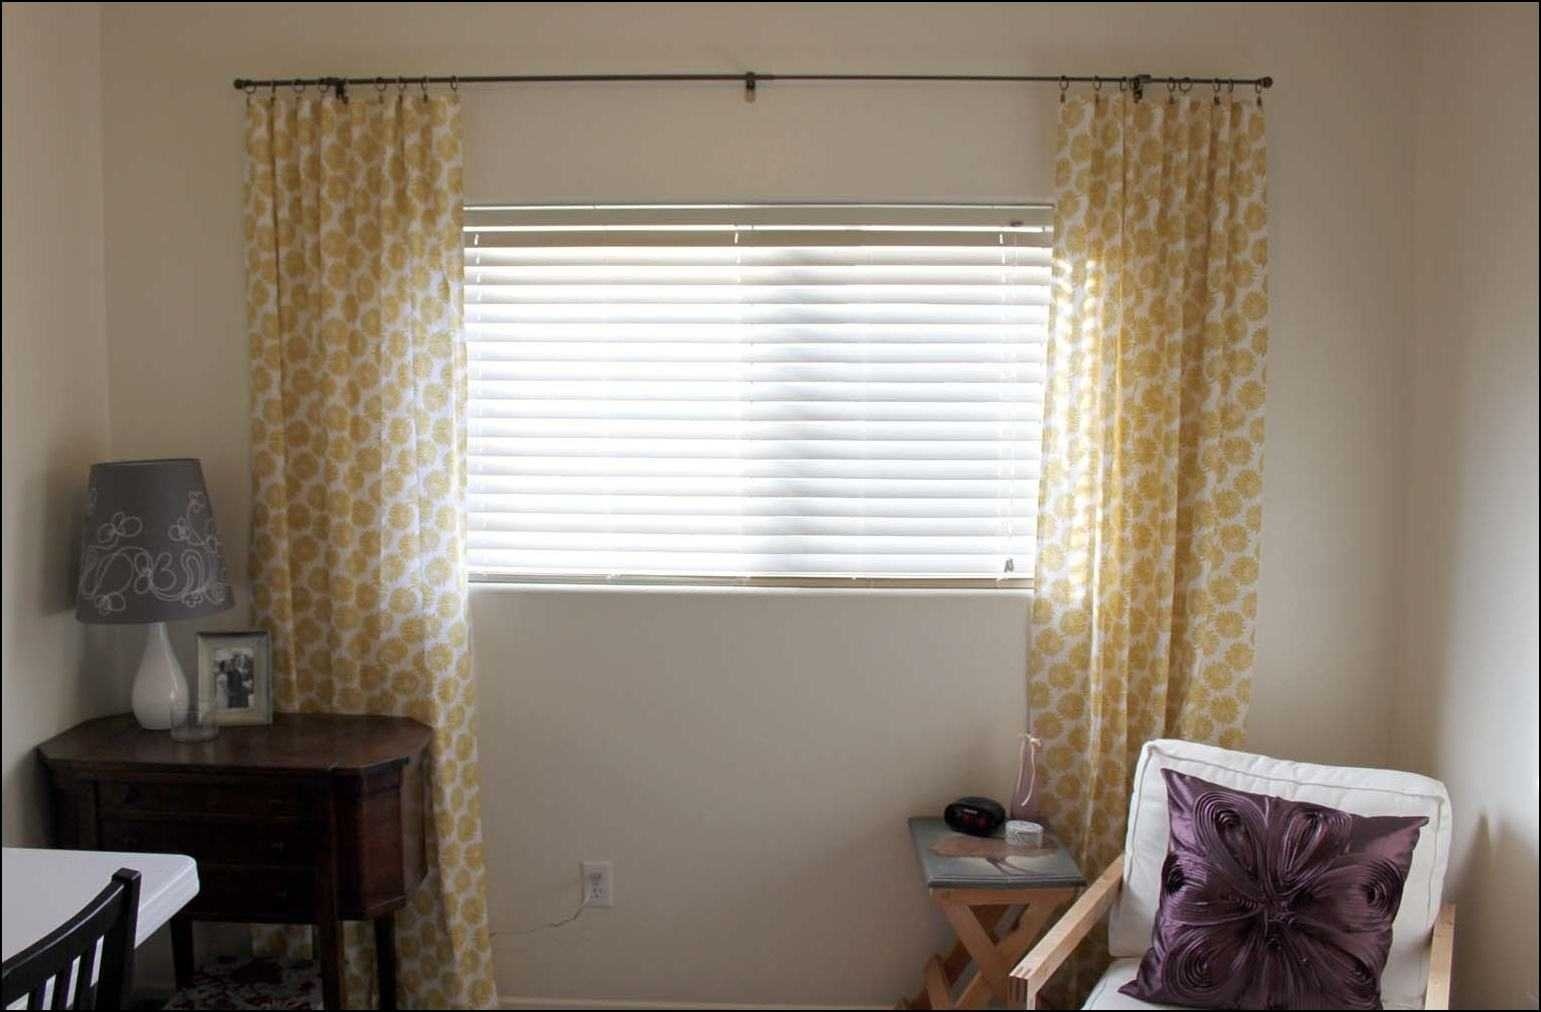 Curtain Ideas For Small Dining Room Window